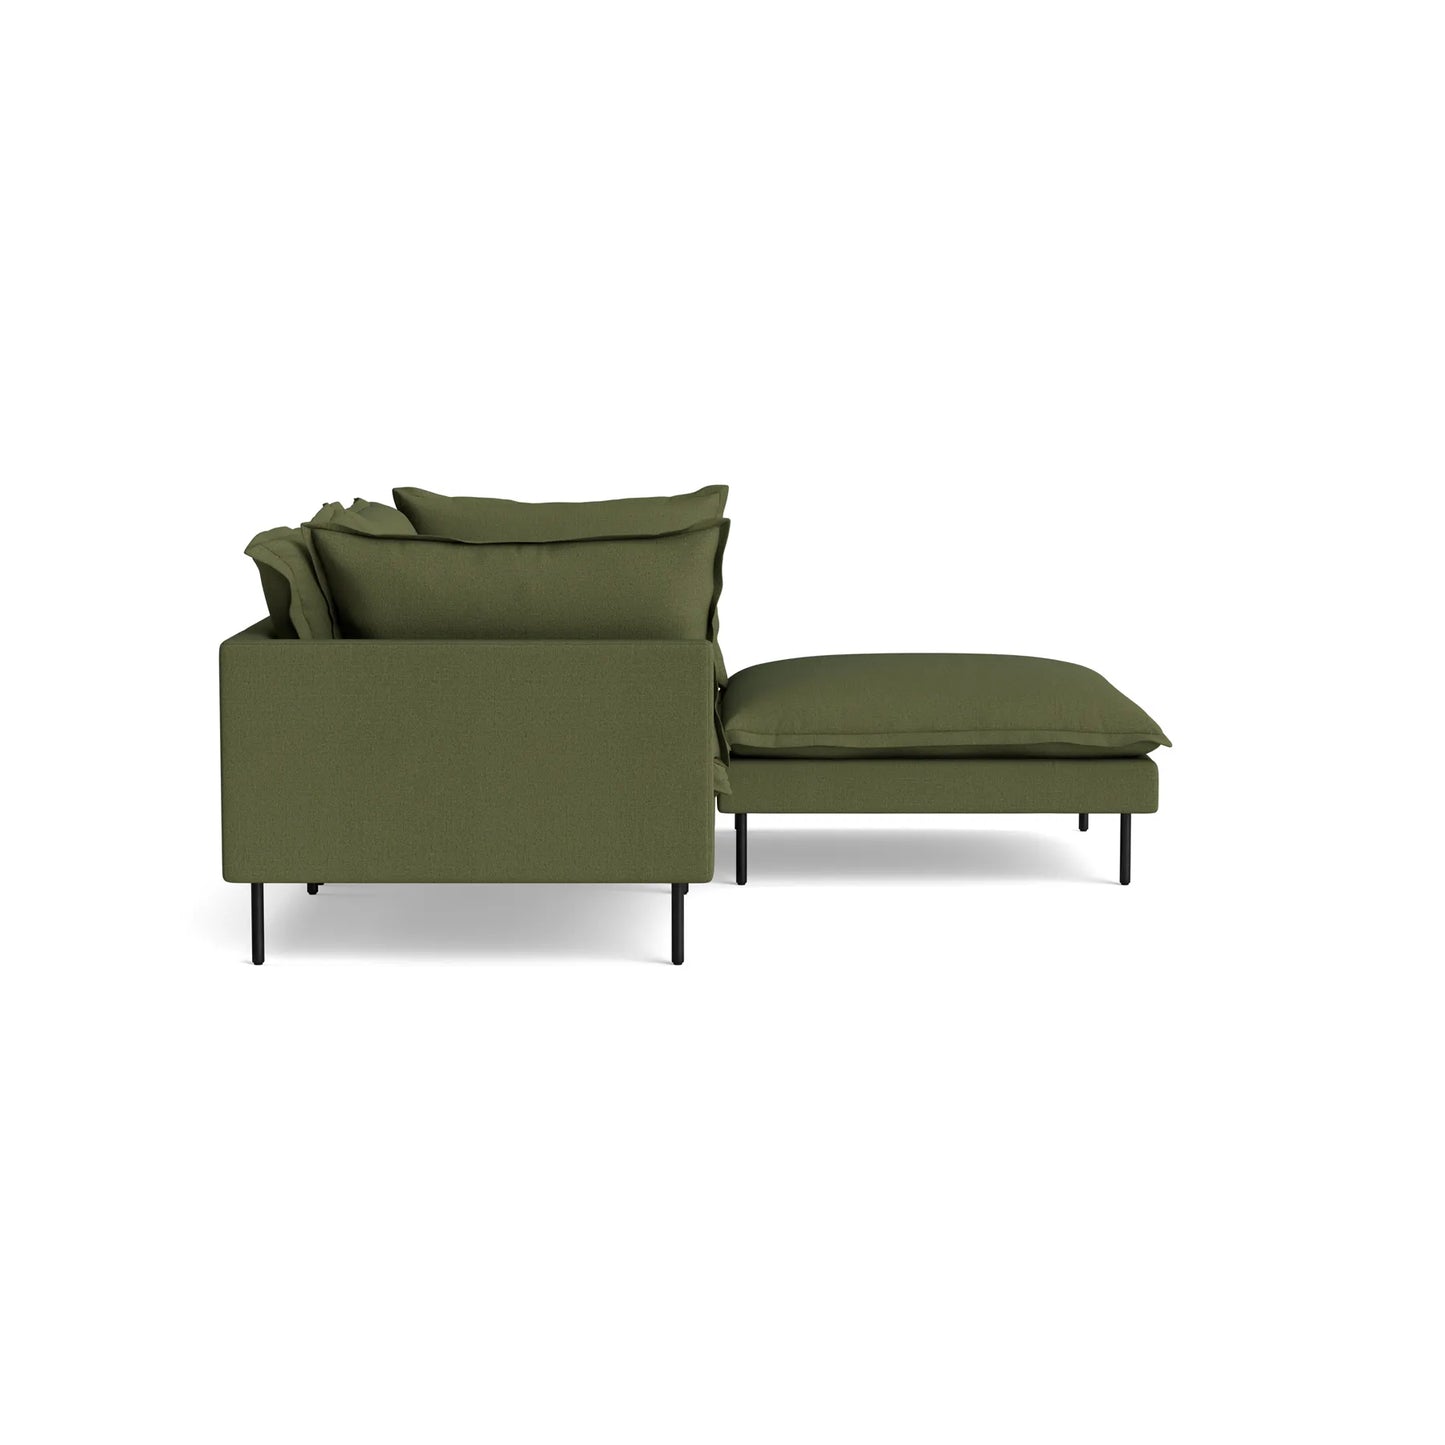 Seam 3 Seater Chaise Sofa - Siena Forest